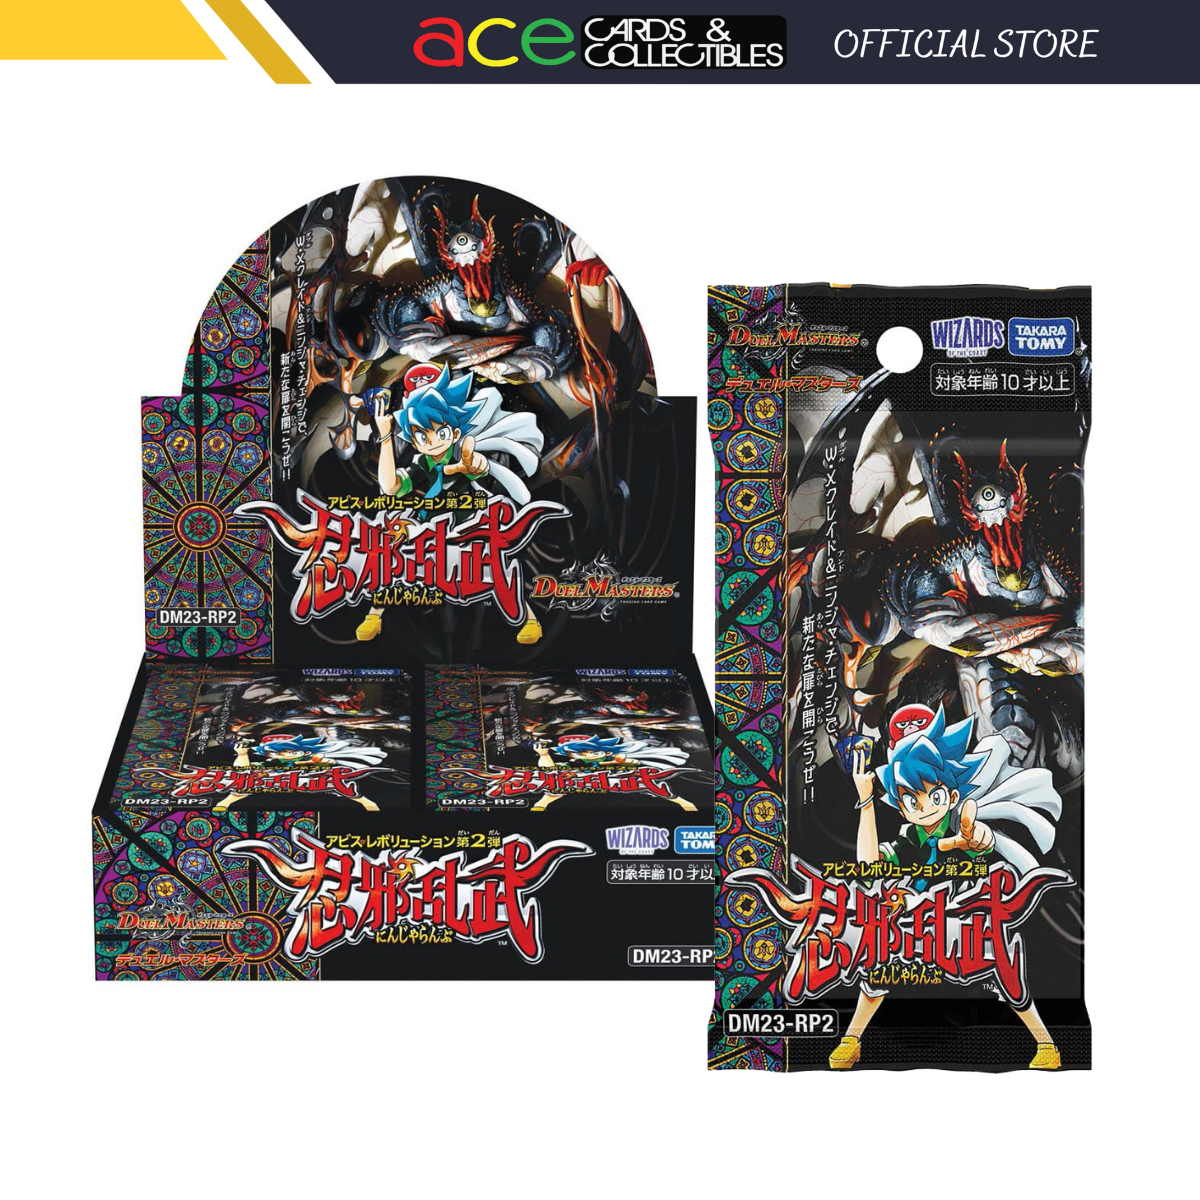 Duel Masters TCG Abyss Revolution Vol. 2 "Ninja Ranbu" [DM23-RP2] (Japanese)-Booster Box (30 pcs)-Takara Tomy-Ace Cards & Collectibles